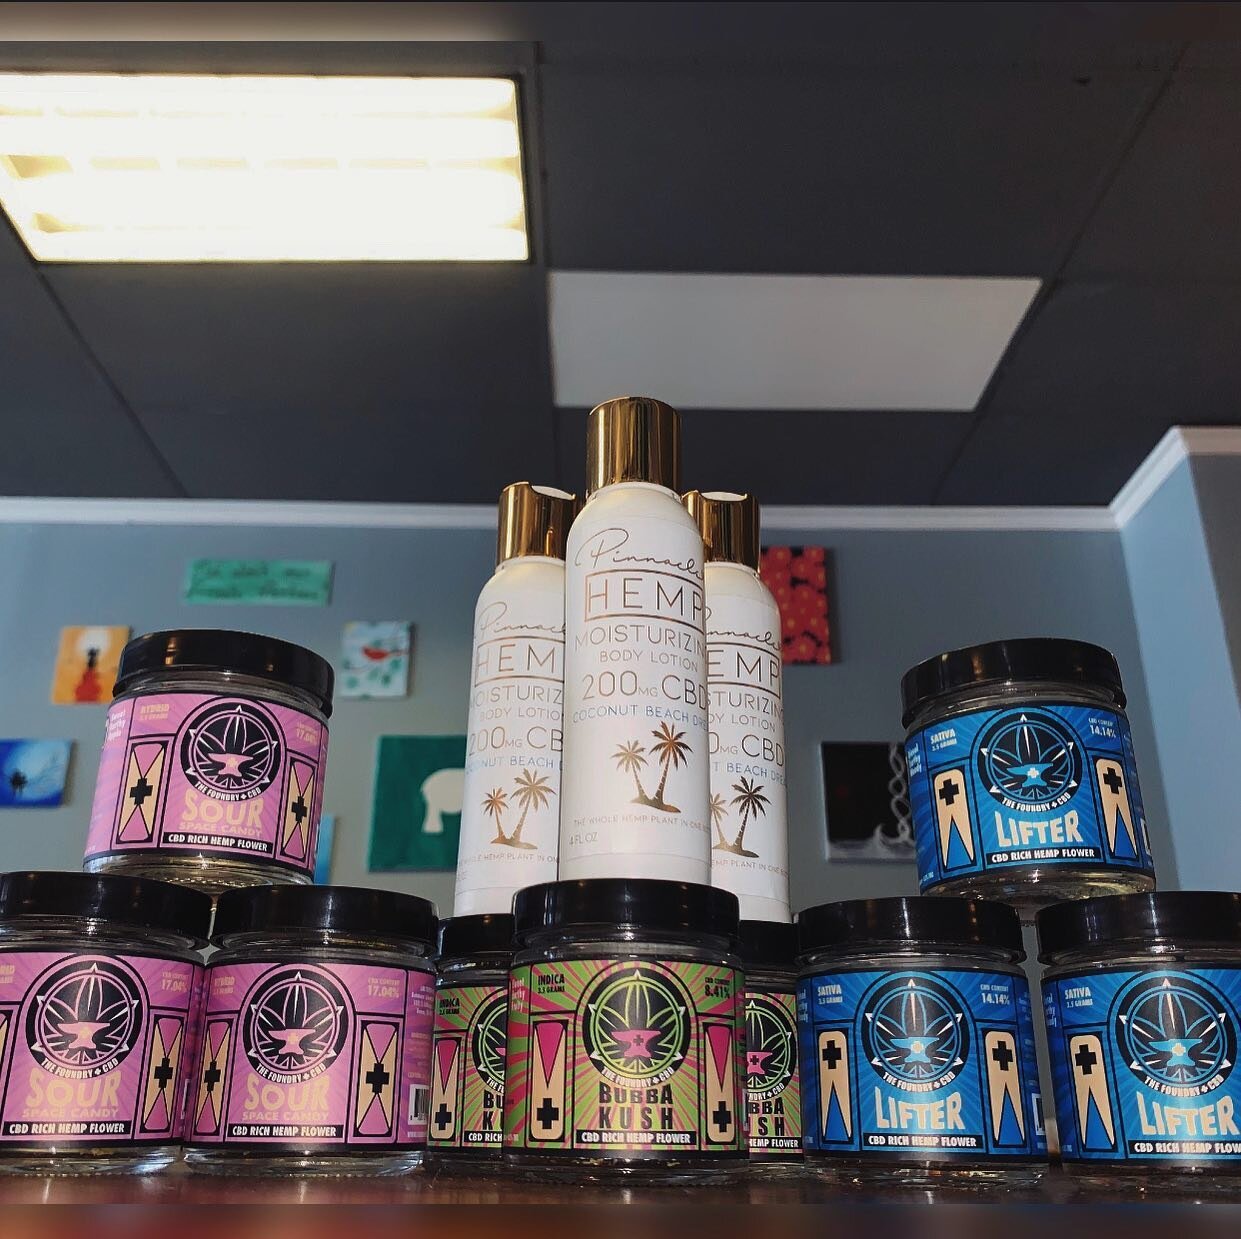 🚨CBD RESTOCK🚨 Dry Herb 🌿 &amp; refreshing coconut scented lotion 🧴perfect for this beautiful Tuesday!
Strains: Sour Space Candy 🍬 , Bubba Kush, and Lifter 🤯. What strain are we using today #TeamTVLRI ? &mdash;&mdash;&mdash;&mdash;&mdash;&mdash;